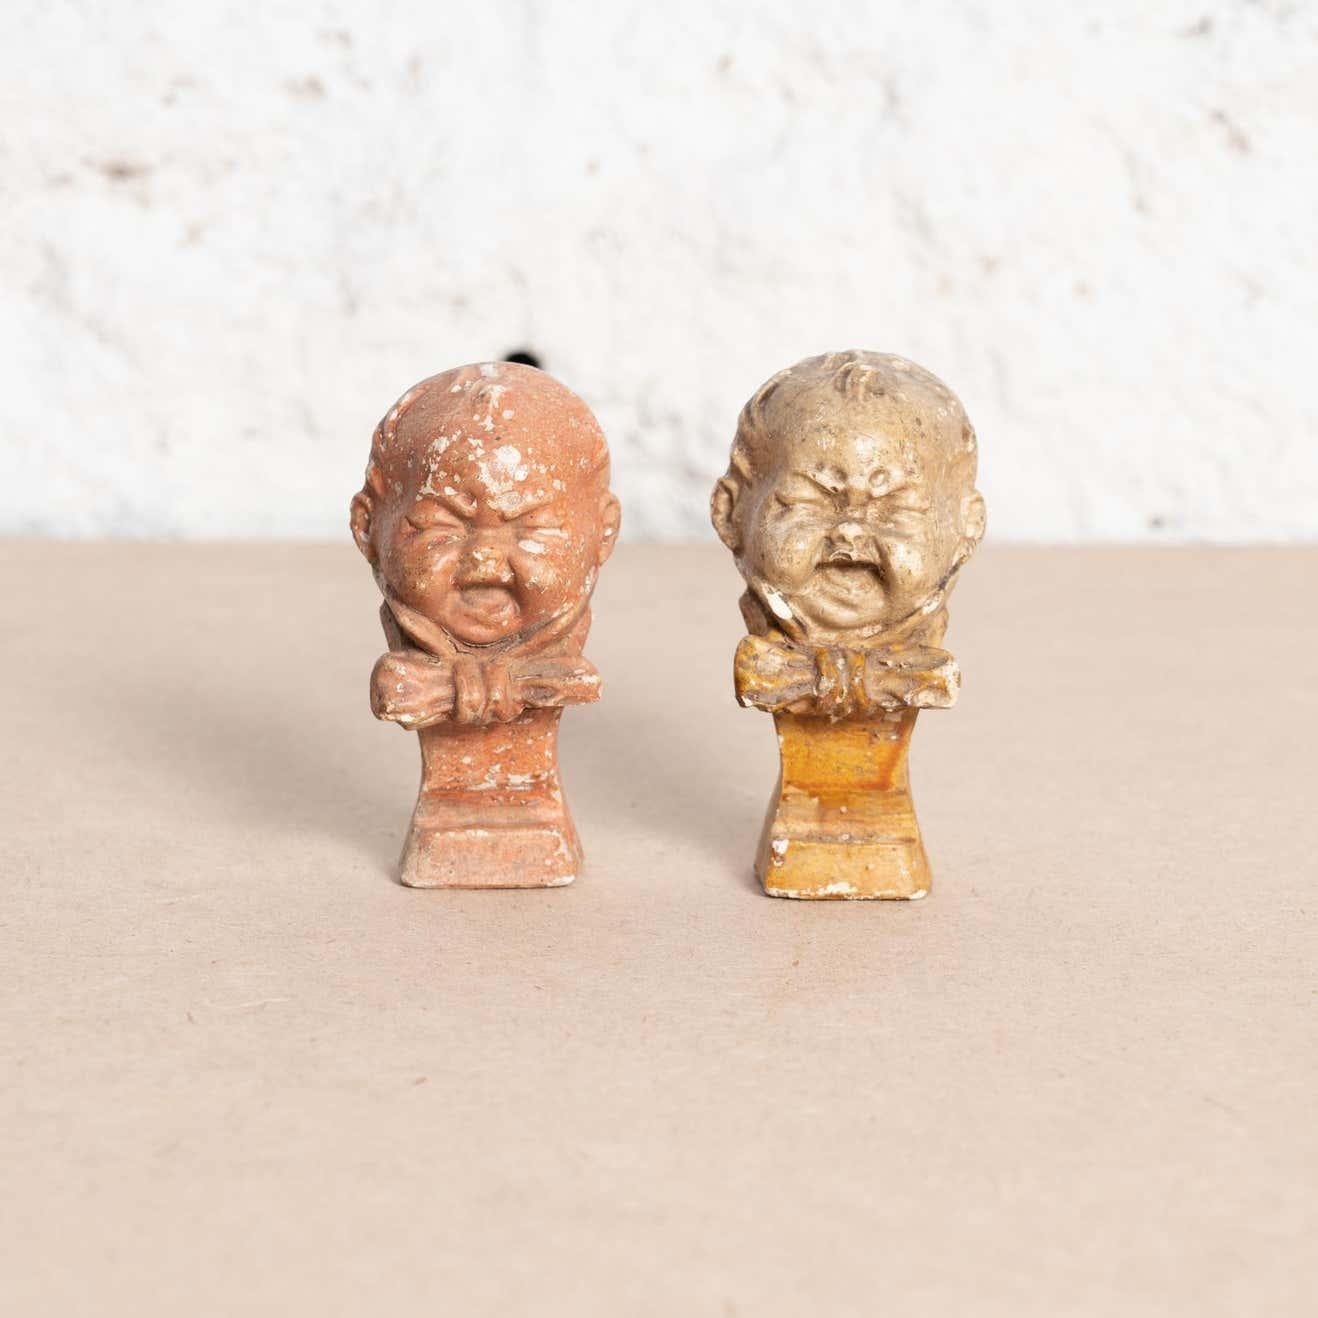 Set of two hand painted traditional plaster crying baby figures.

Made in traditional Catalan atelier in Spain, circa 1930.

In original condition, with minor wear consistent with age and use, preserving a beautiful